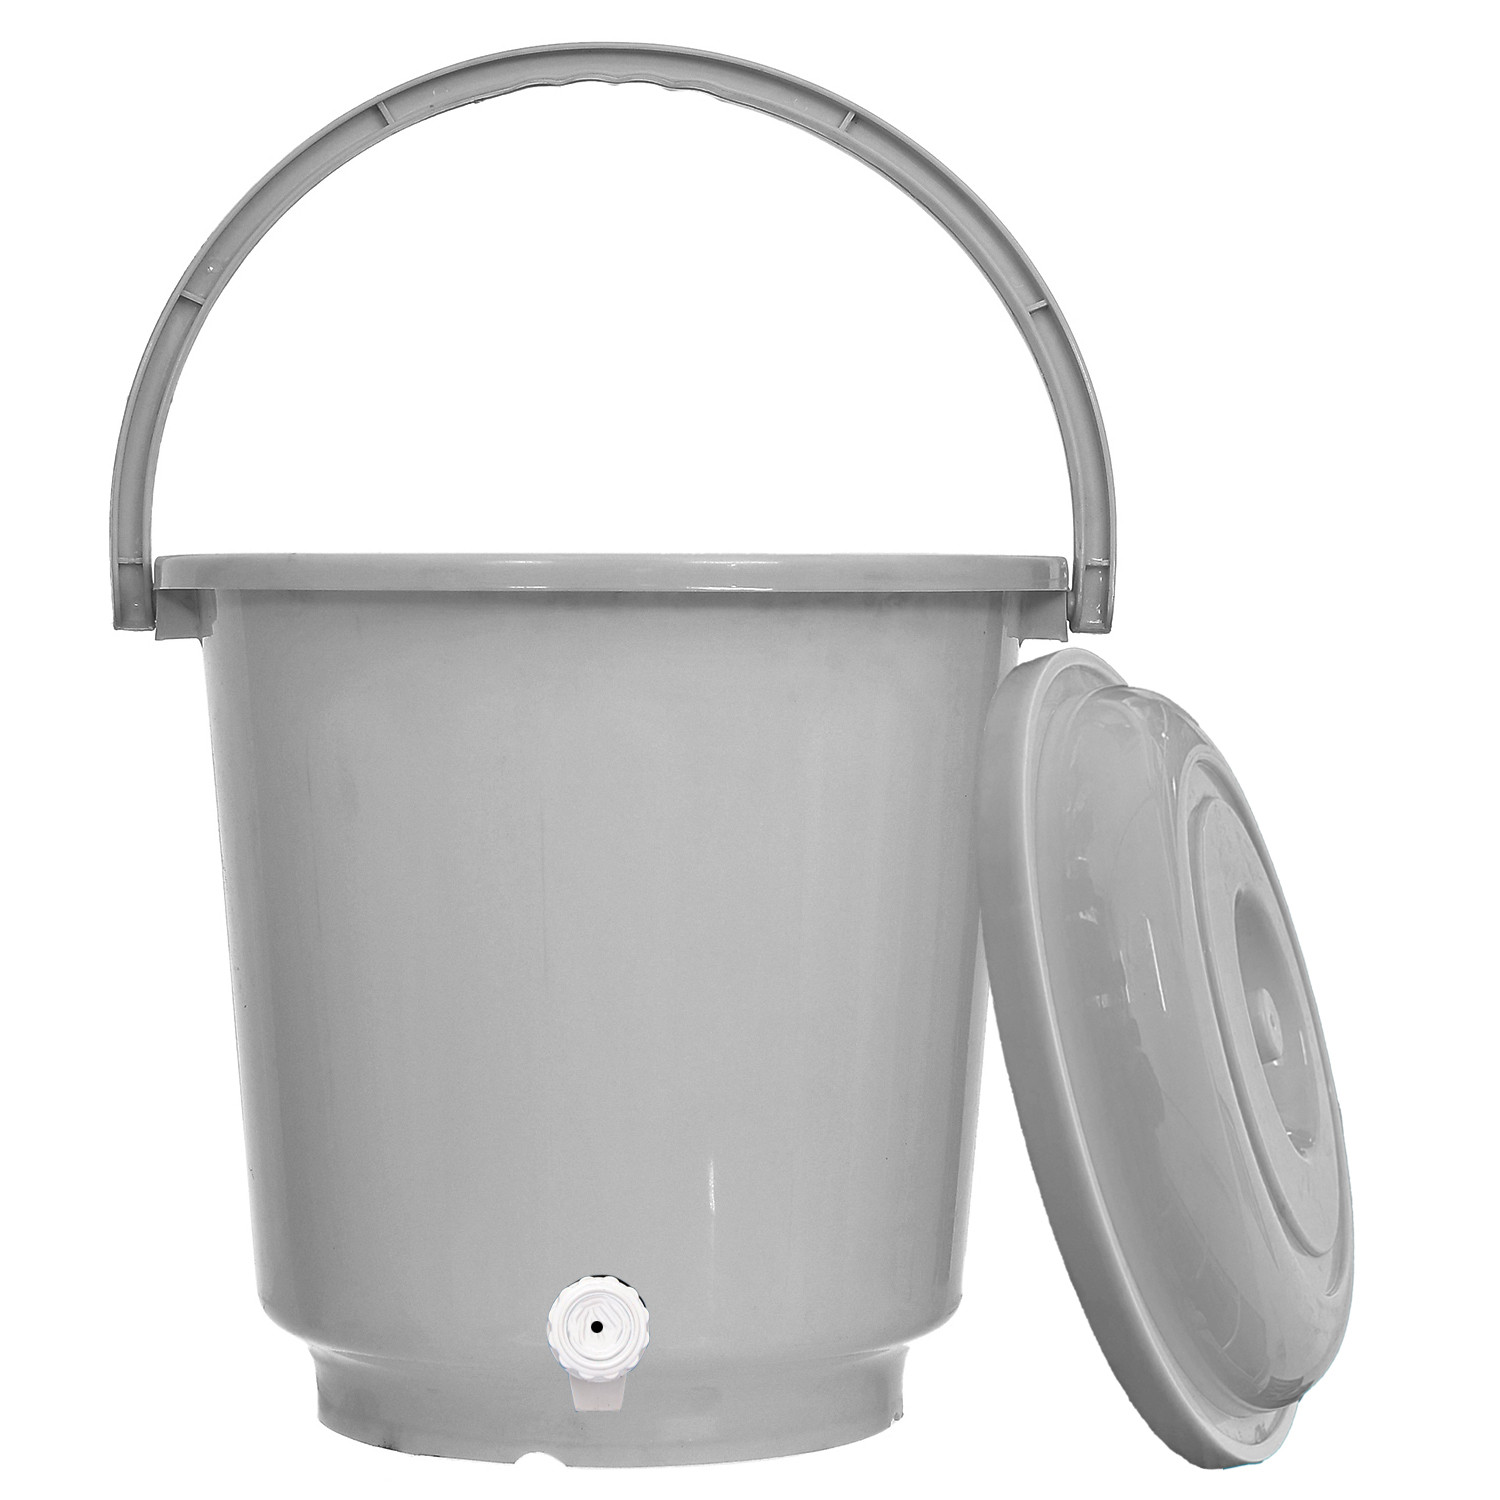 Kuber Industries Multipurposes Plastic Bucket With Lid & Tap System For Home Cleaning & Save Water, 18Ltr. (Grey)